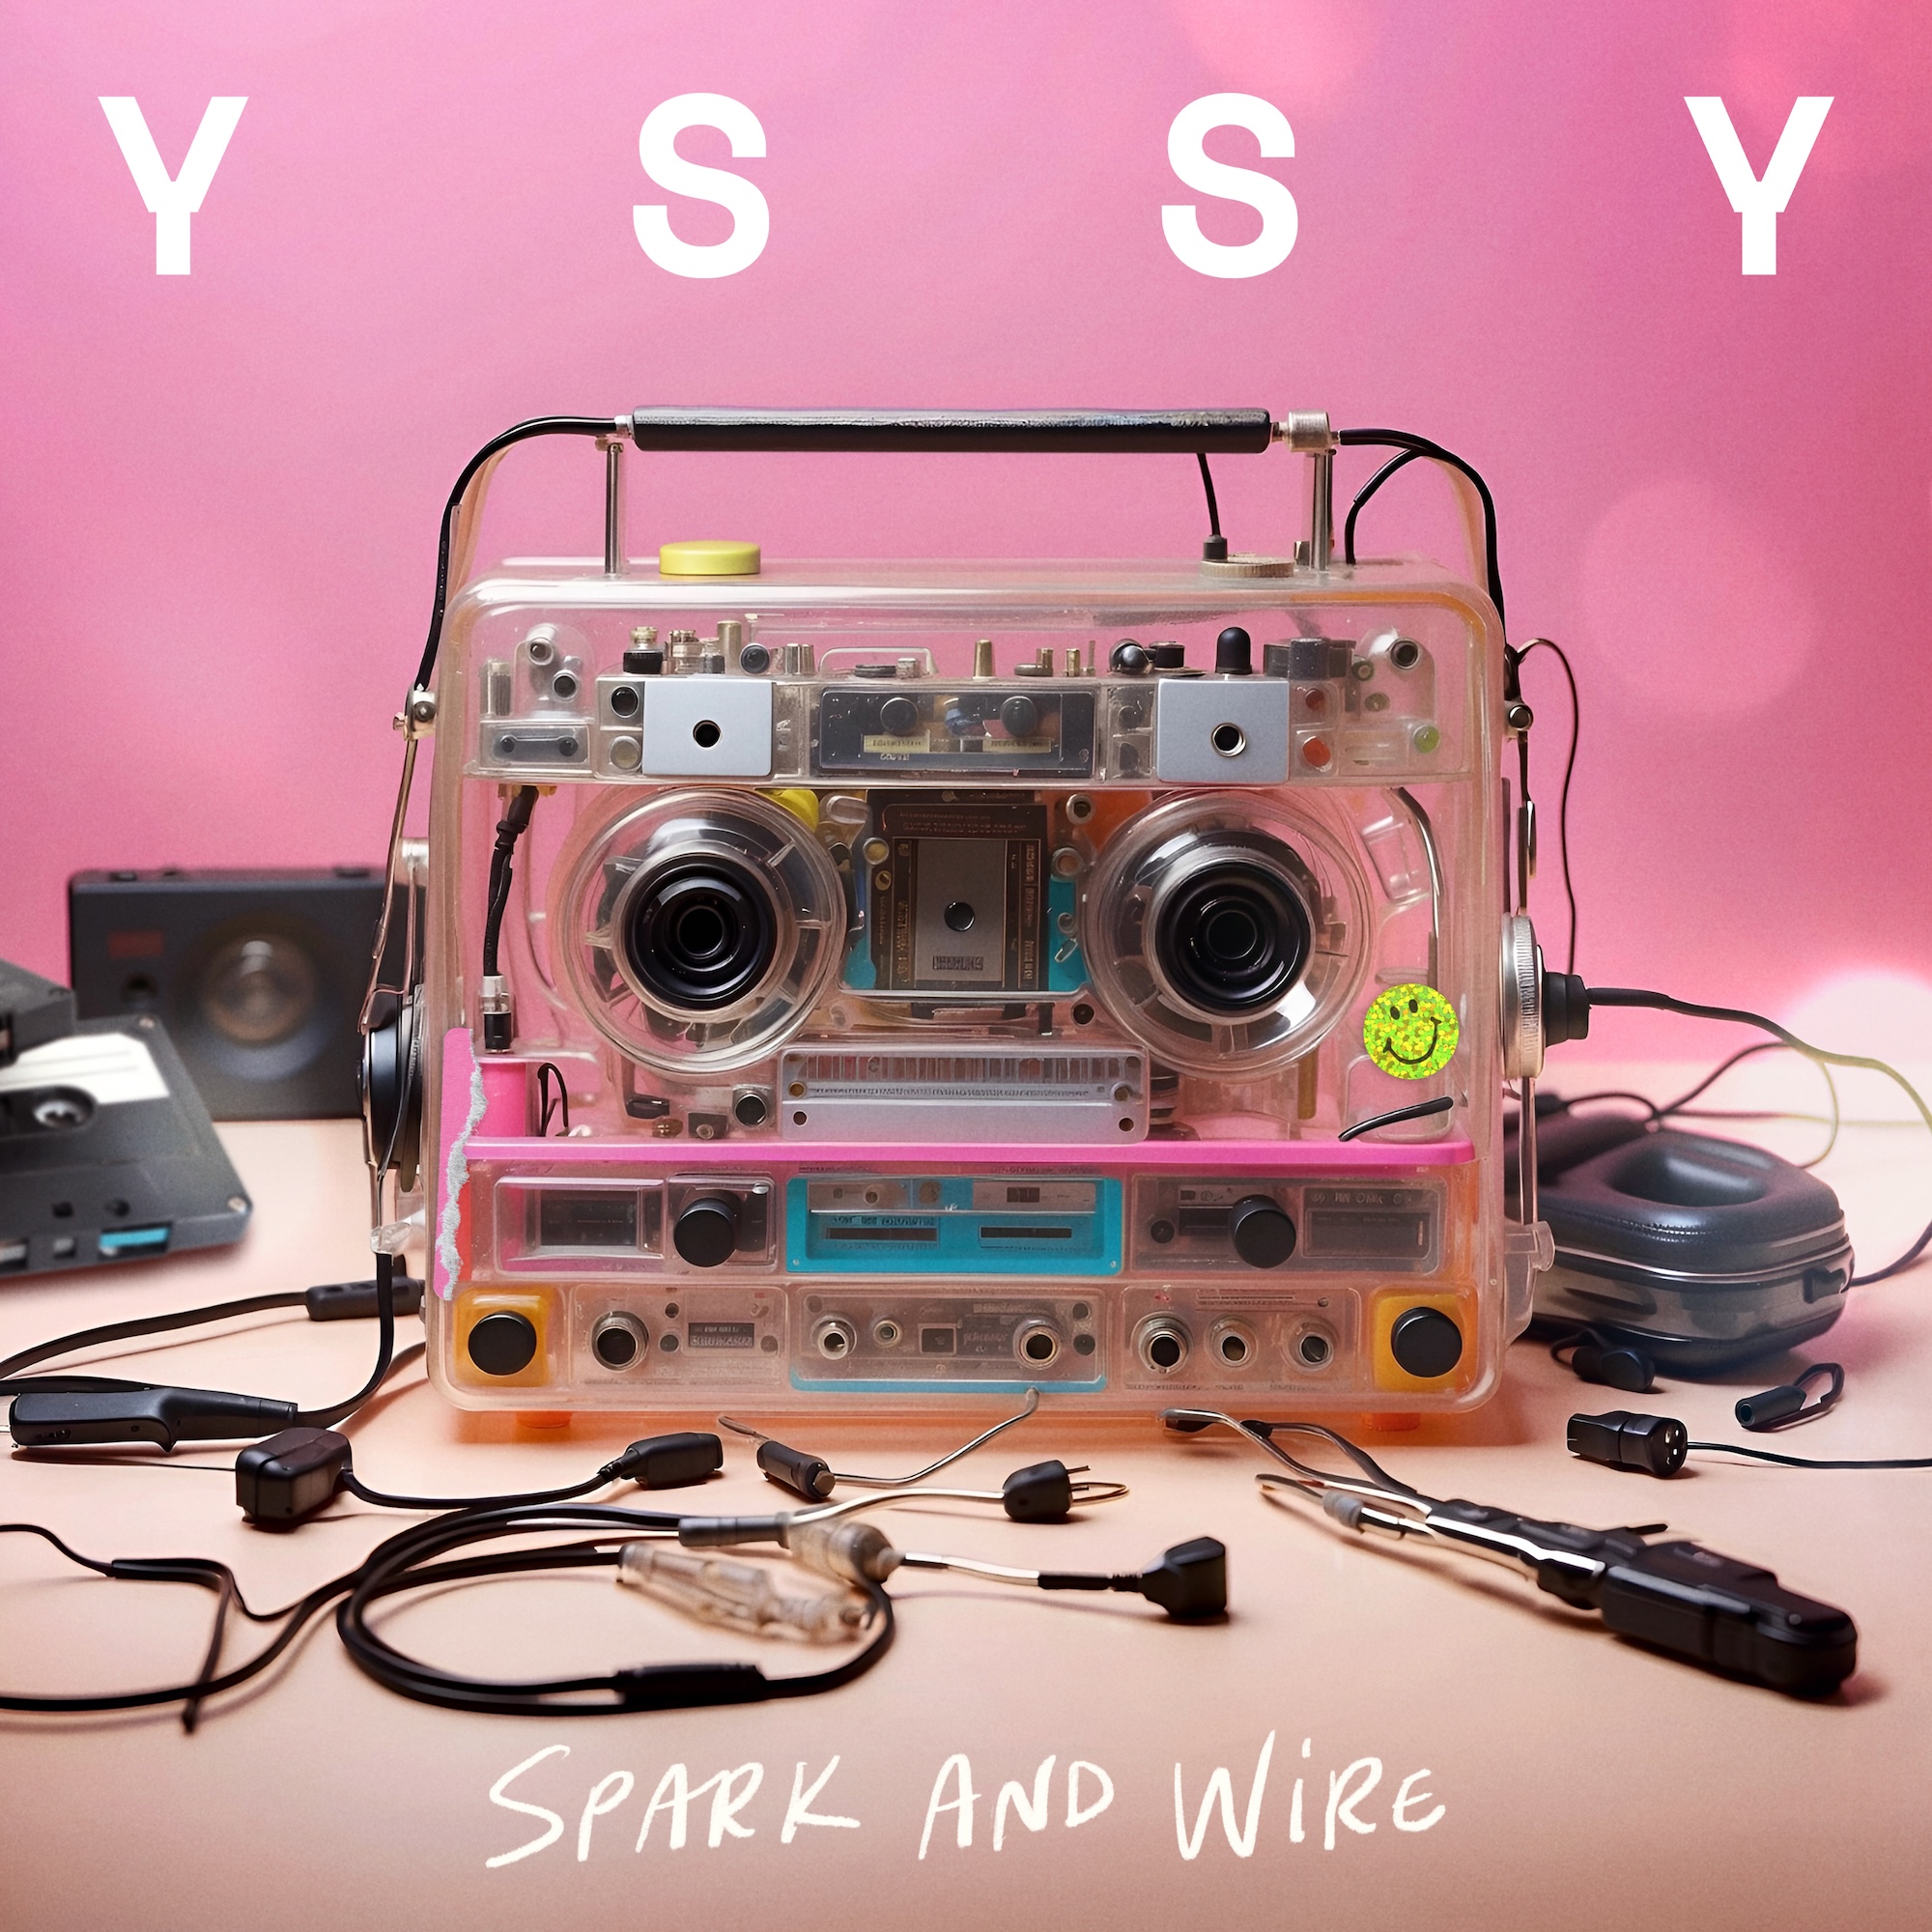 YSSY - Spark And Wire